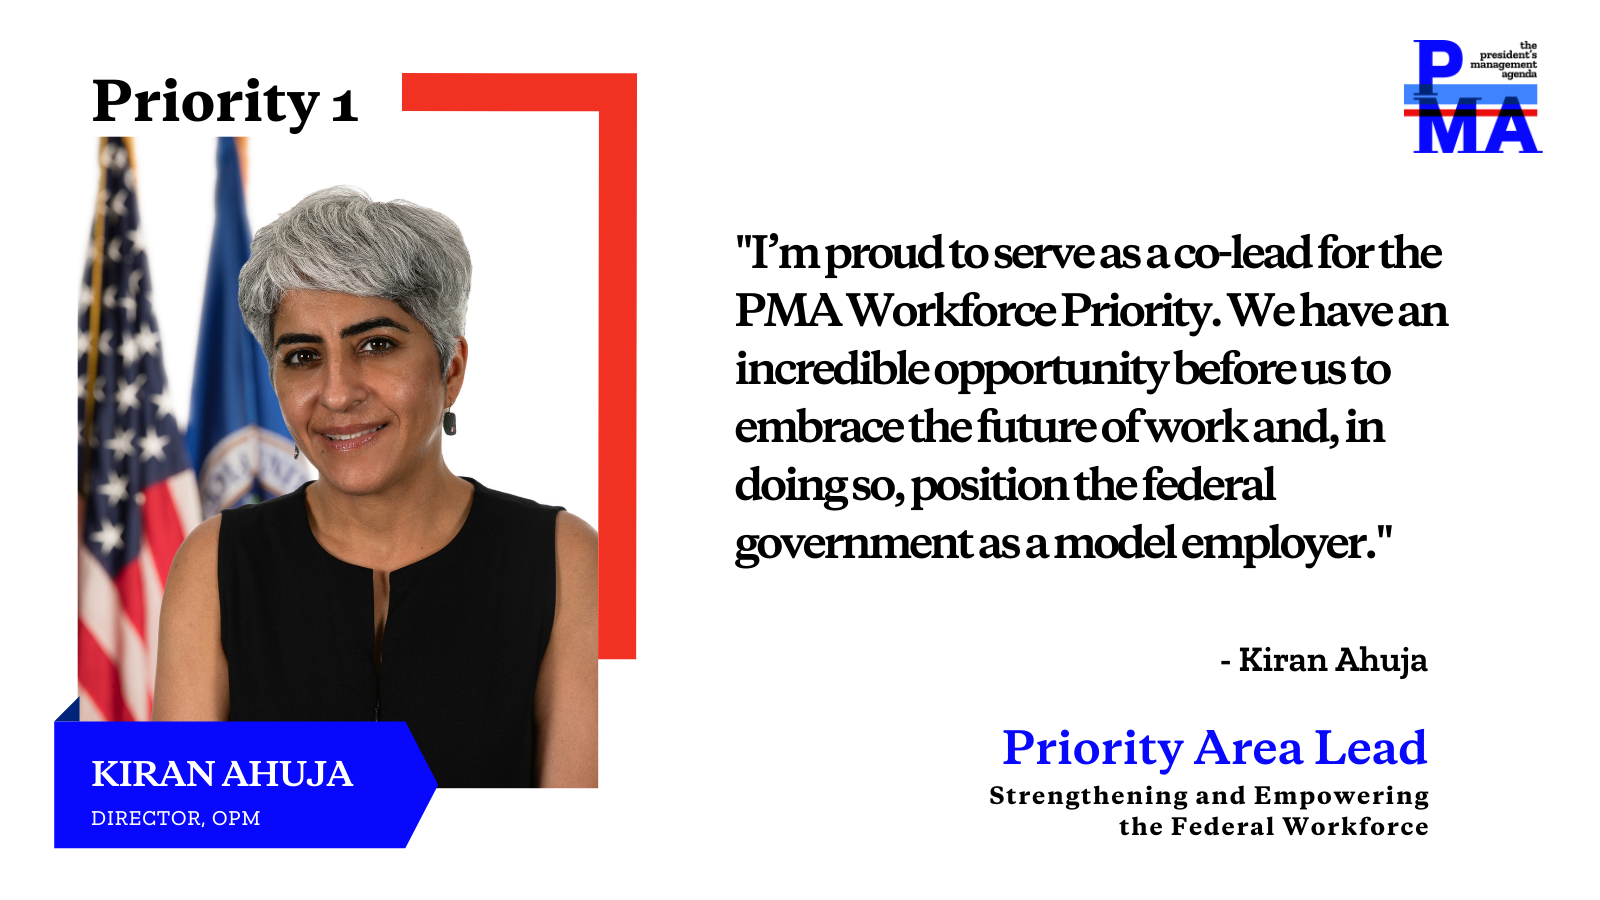 Social card of Kiran Ahuja with text: I'm proud to serve as a co-lead for the PMA Workforce Priority. We have an incredible opportunity before us to embrace the future of work and, in doing so, position the federal government as a model employer.